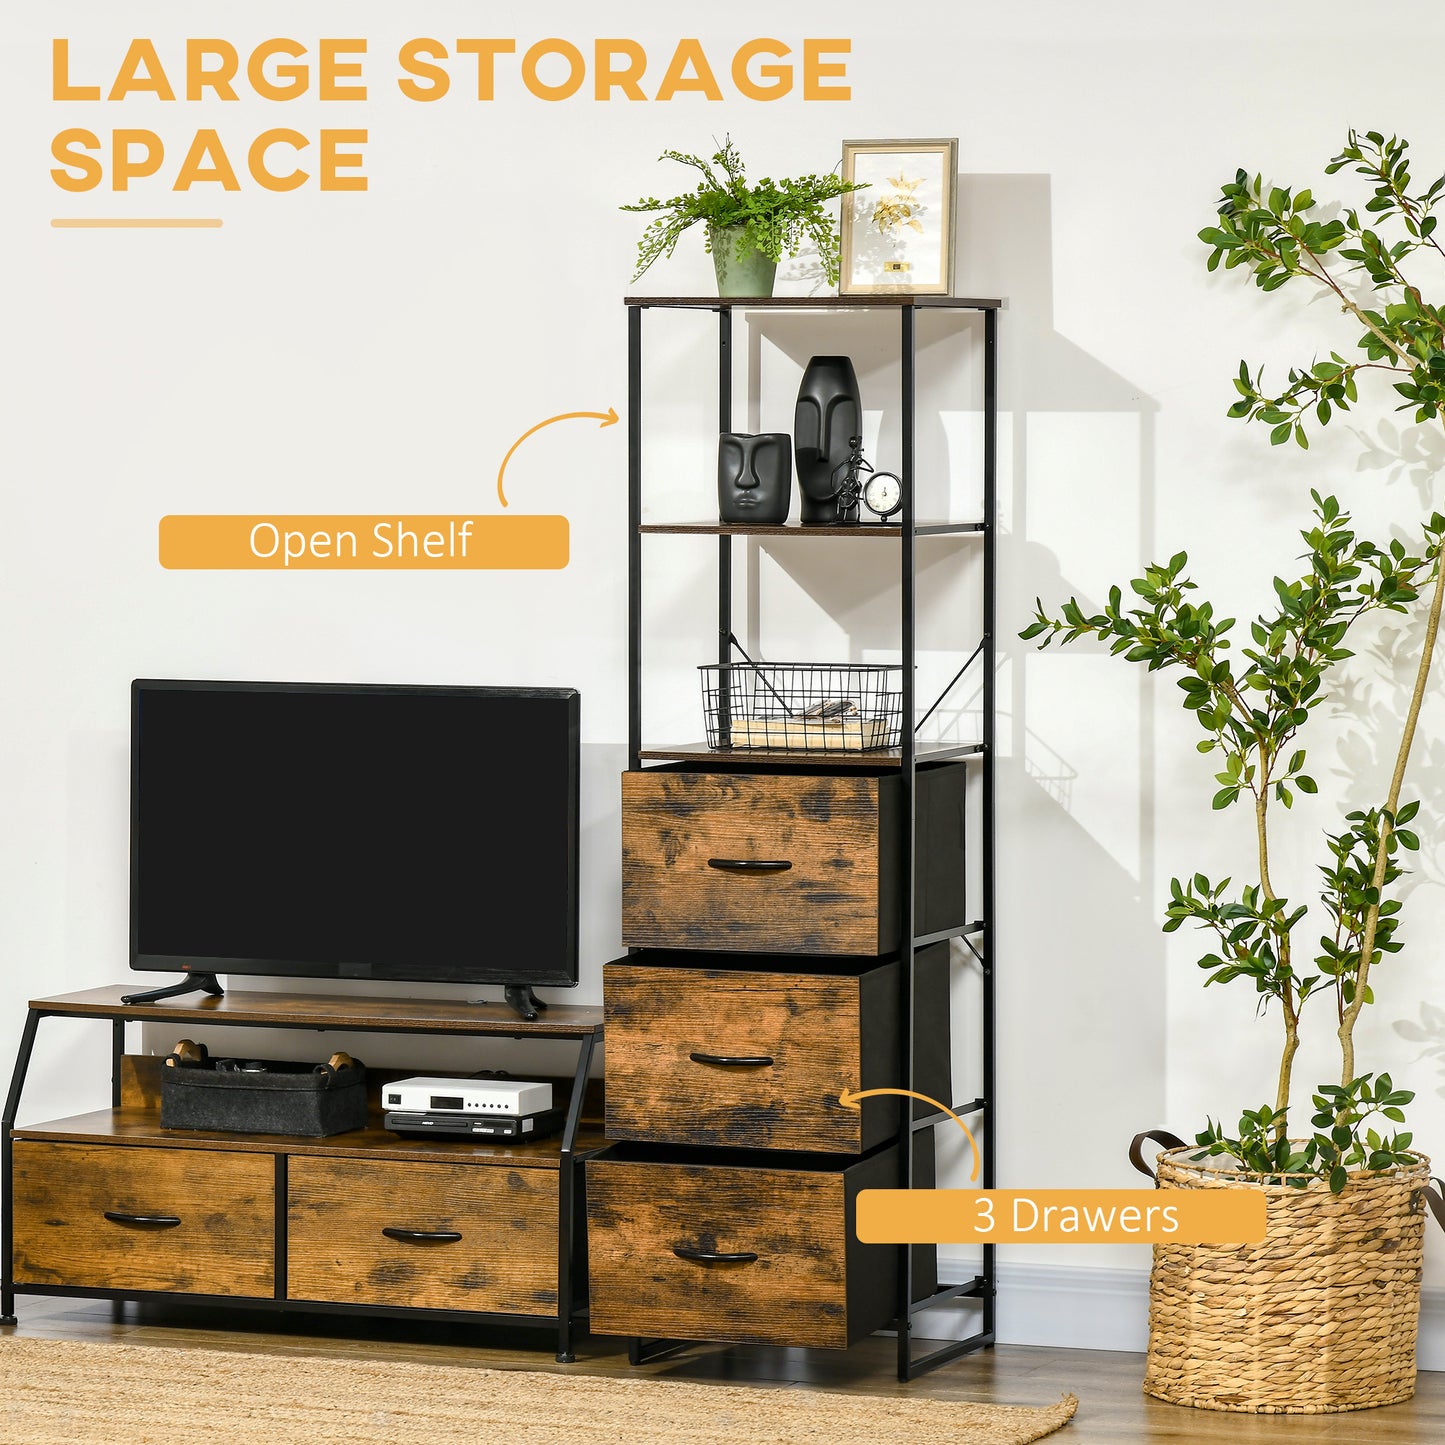 HOMCOM Industrial Storage Cabinet with 2 Open Shelves and 3 Foldable Fabric Drawers, Rustic Brown